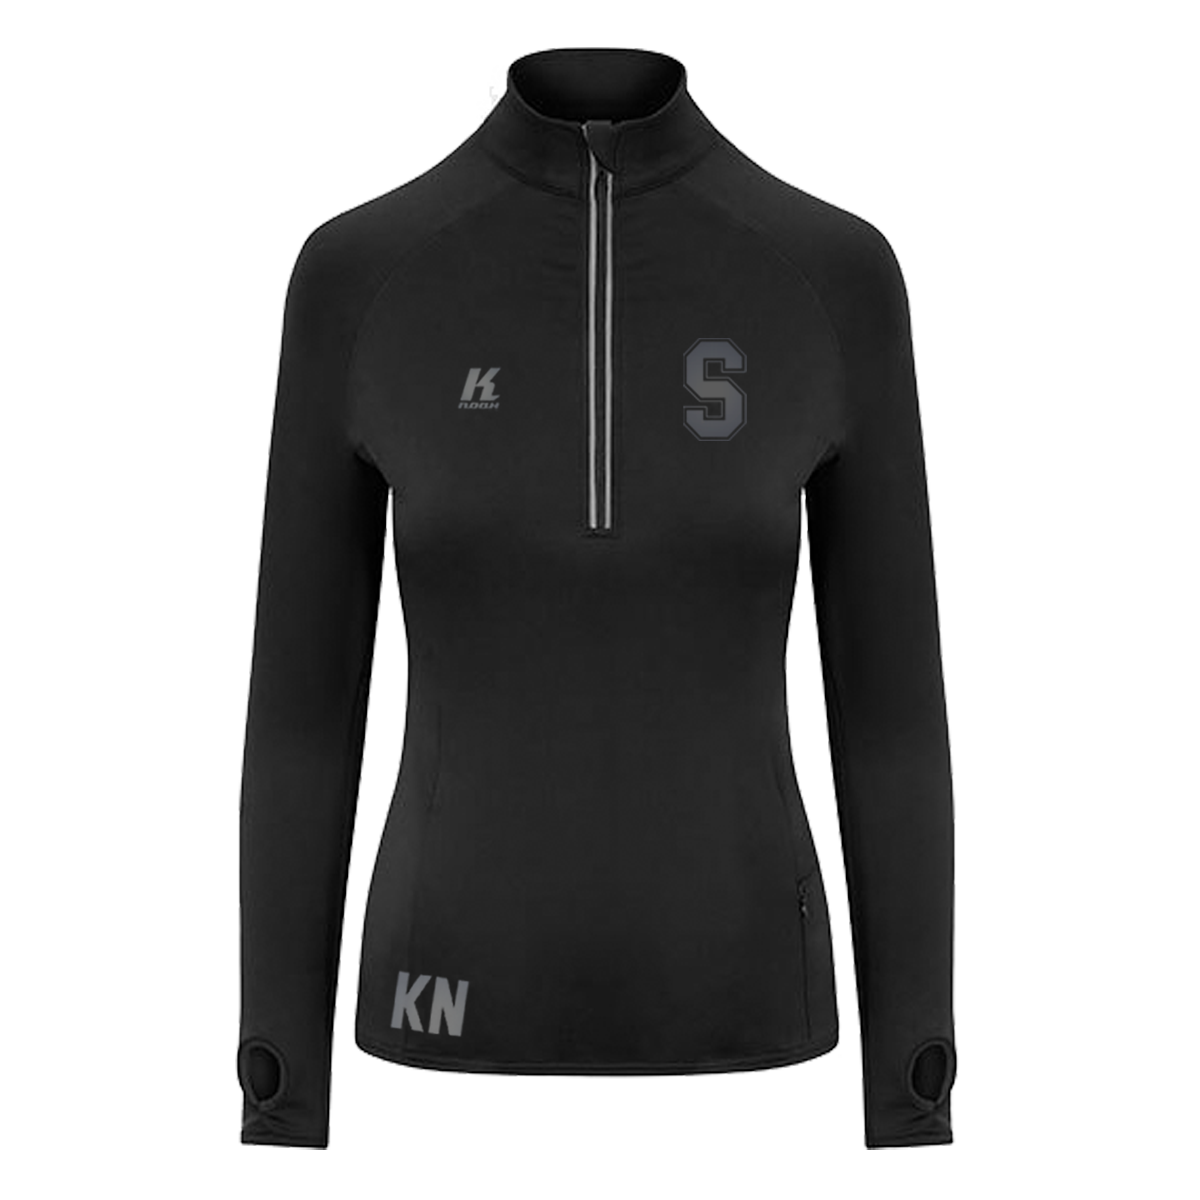 Scorpions "Blackline" Womens Cool Flex 1/2 Zip Top with Initials/Playernumber